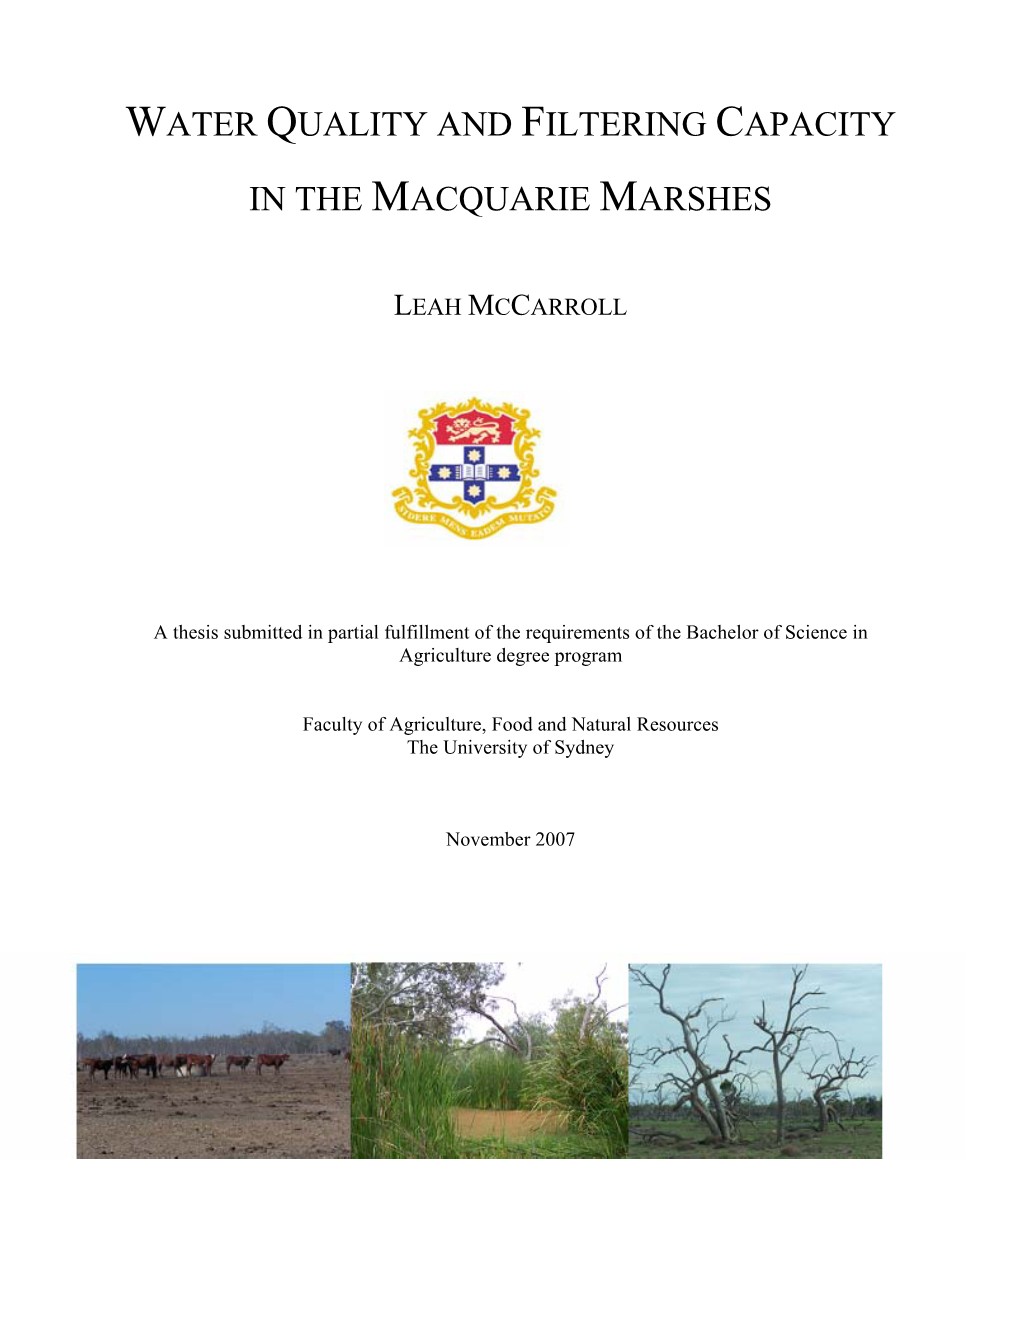 Water Quality and Filtering Capacity in the Macquarie